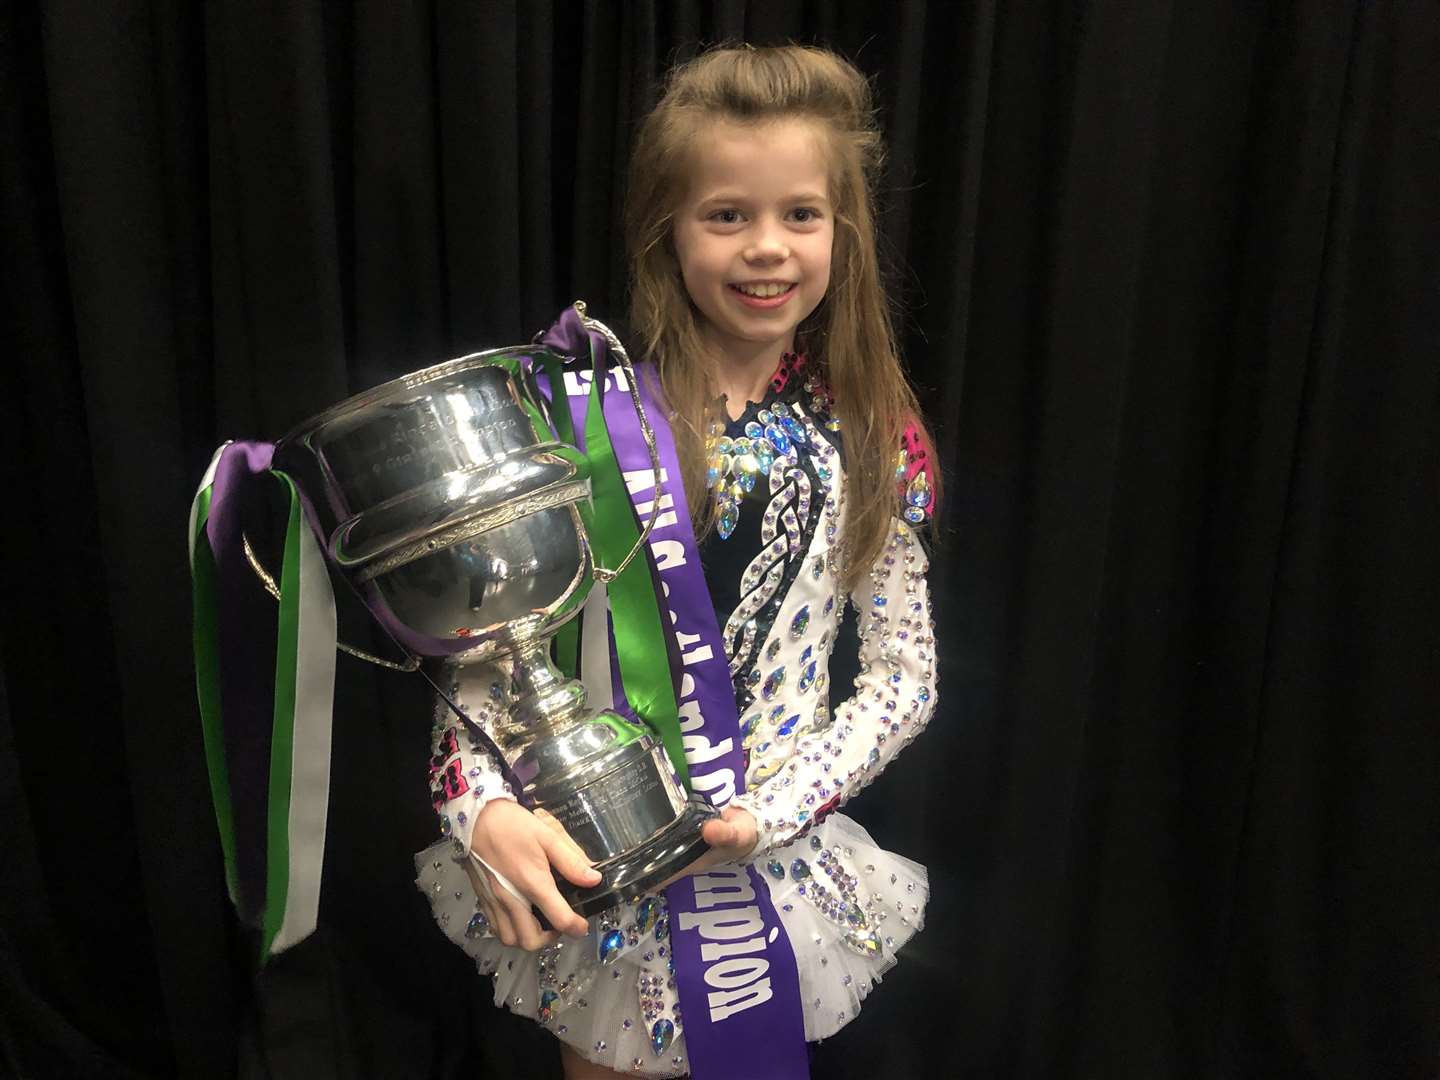 Hannah with her Southern England Oireachtas trophy